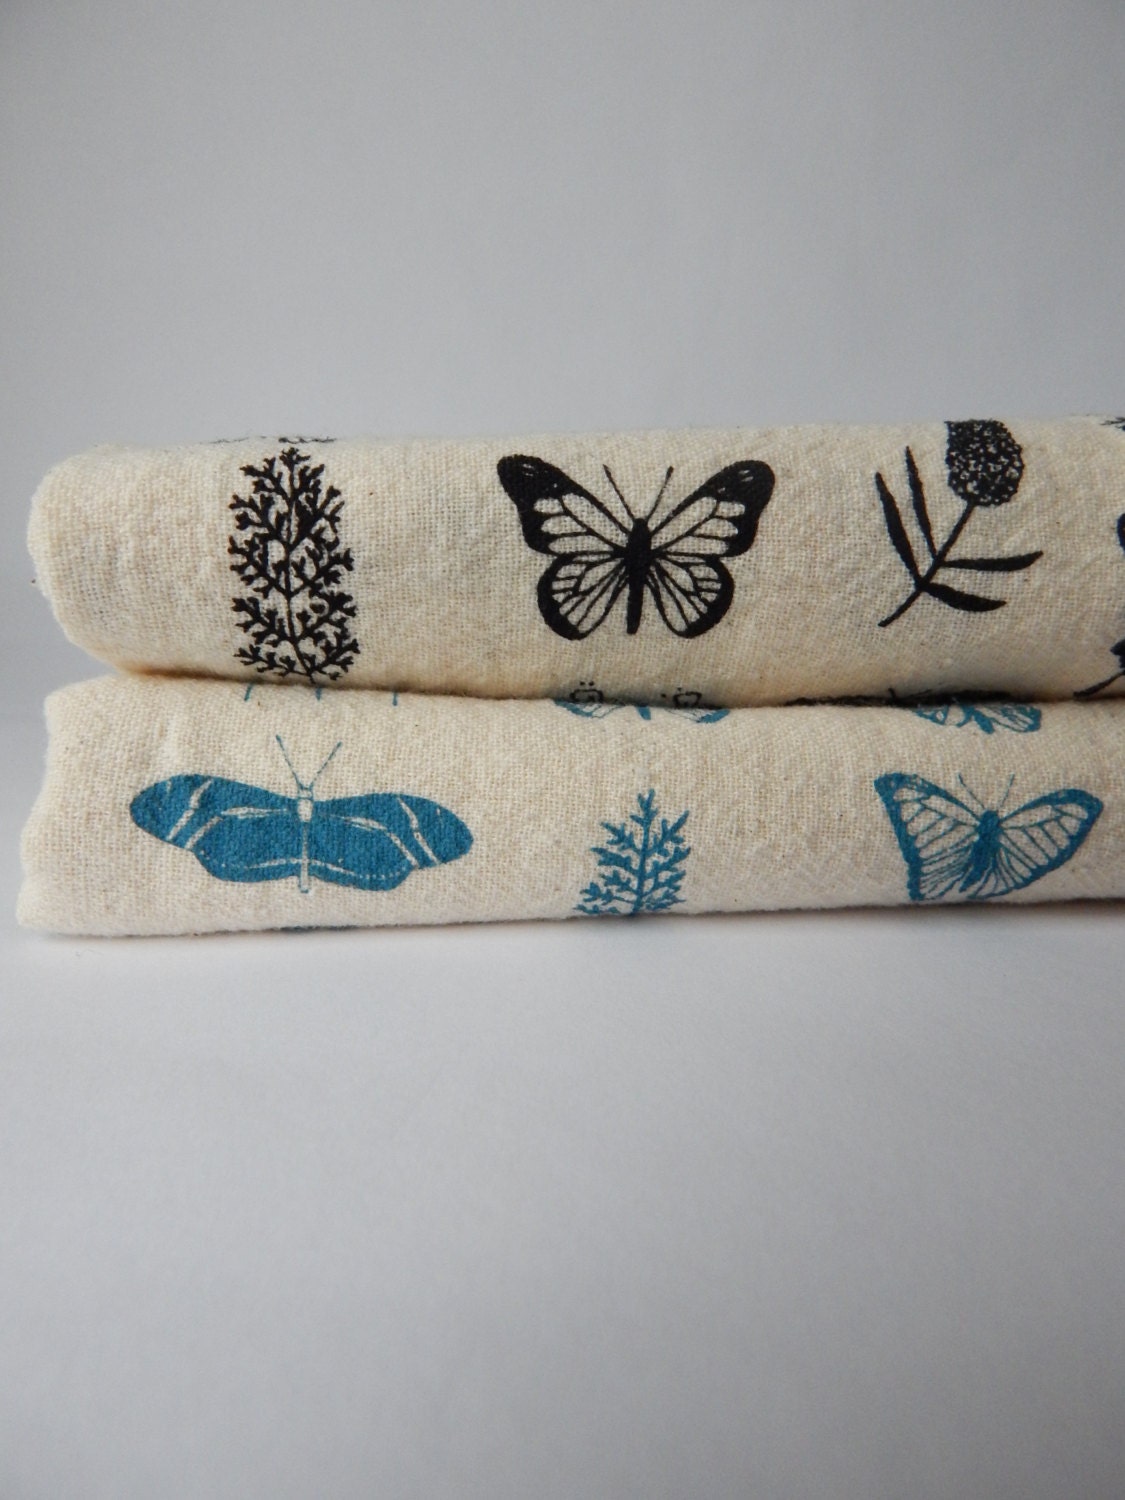 Butterfly Floral Kitchen Towel, Hand Printed, Natural Cotton